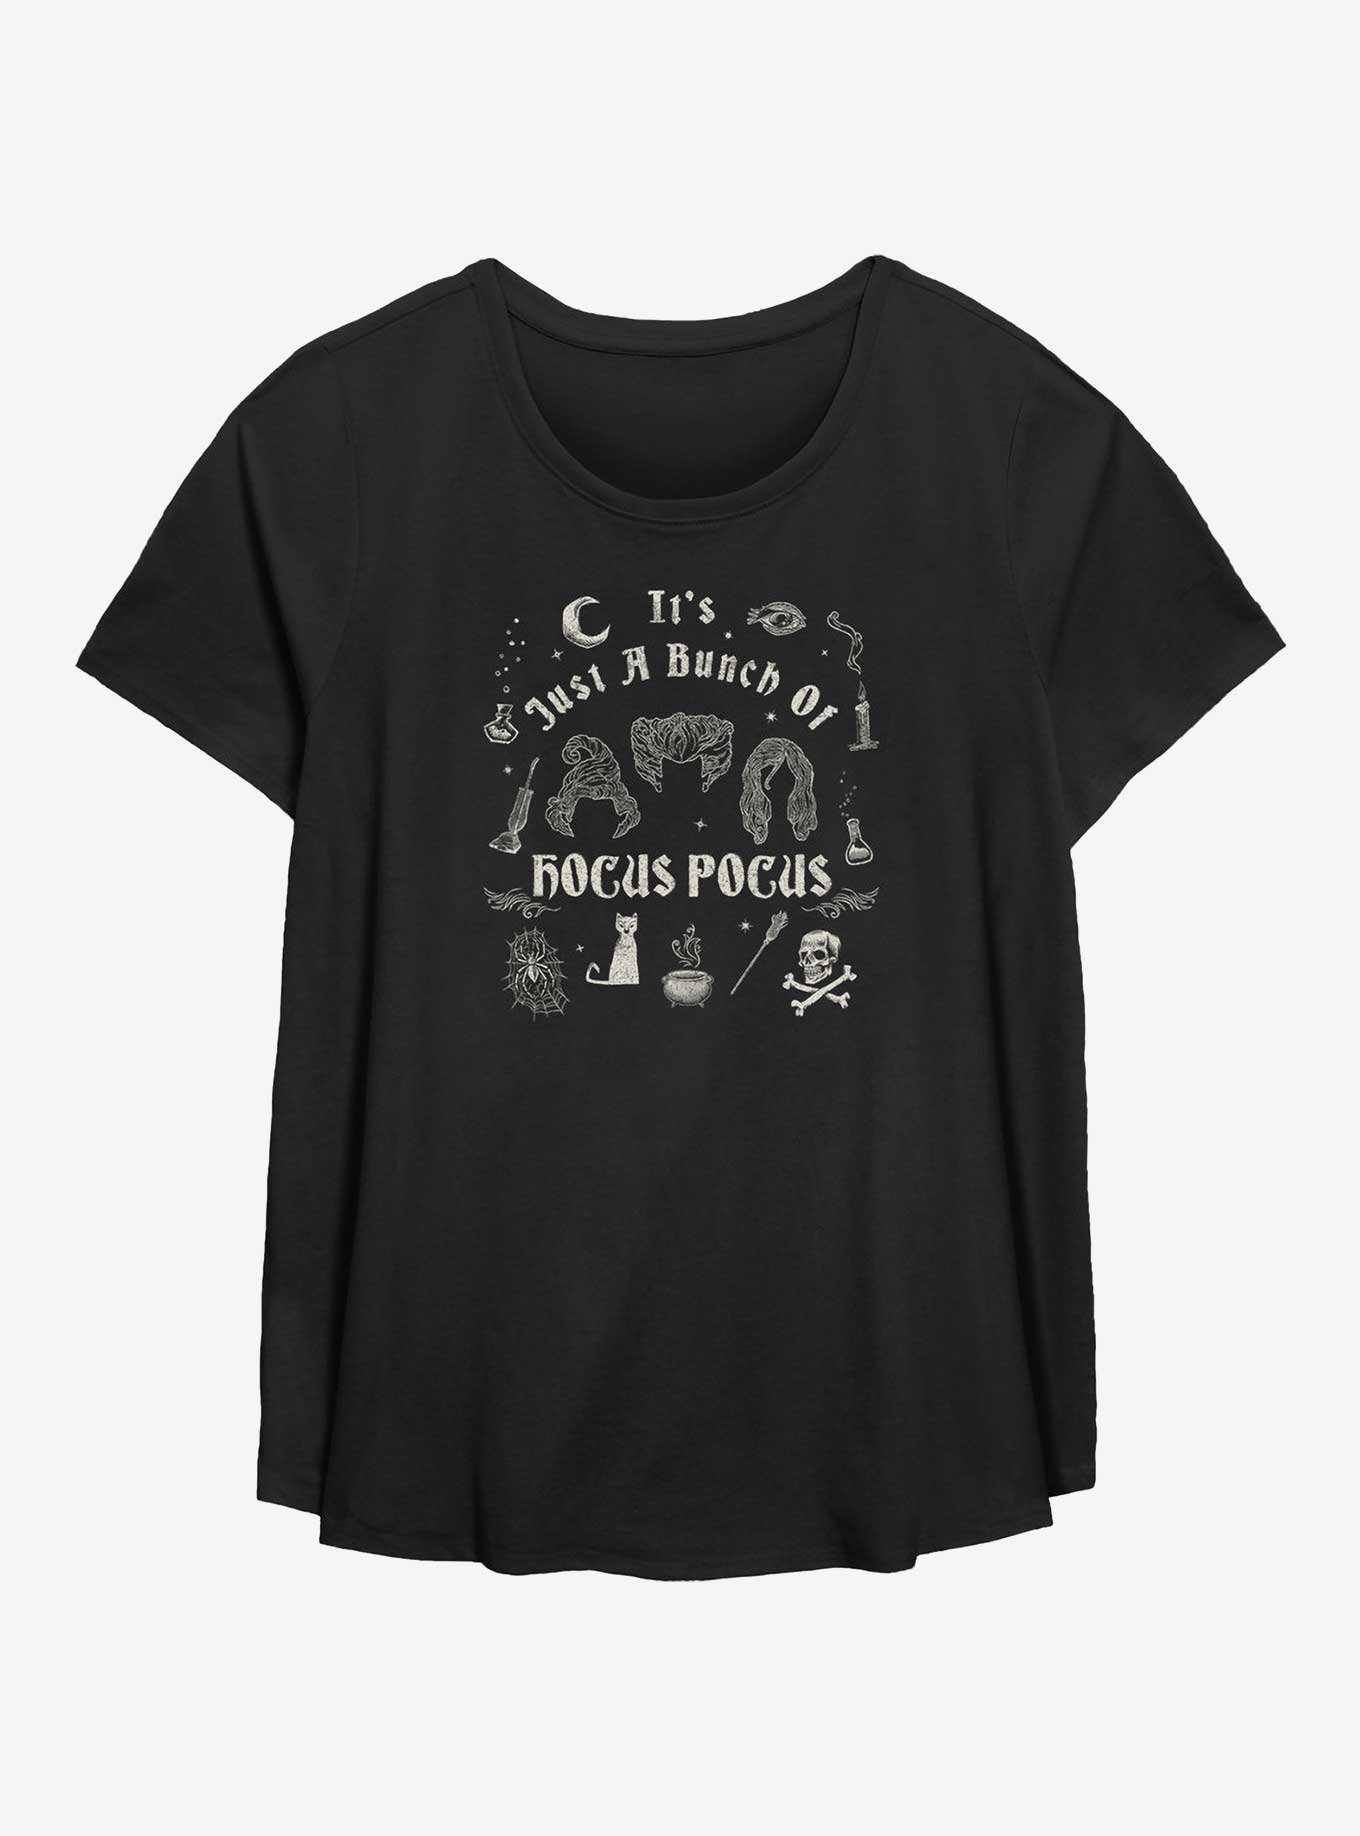 Disney Hocus Pocus Black Flame Tank Top, 107 of the Year's Best Hocus  Pocus Merch — Shop These Devilish Delights Before They Fly Off Shelves